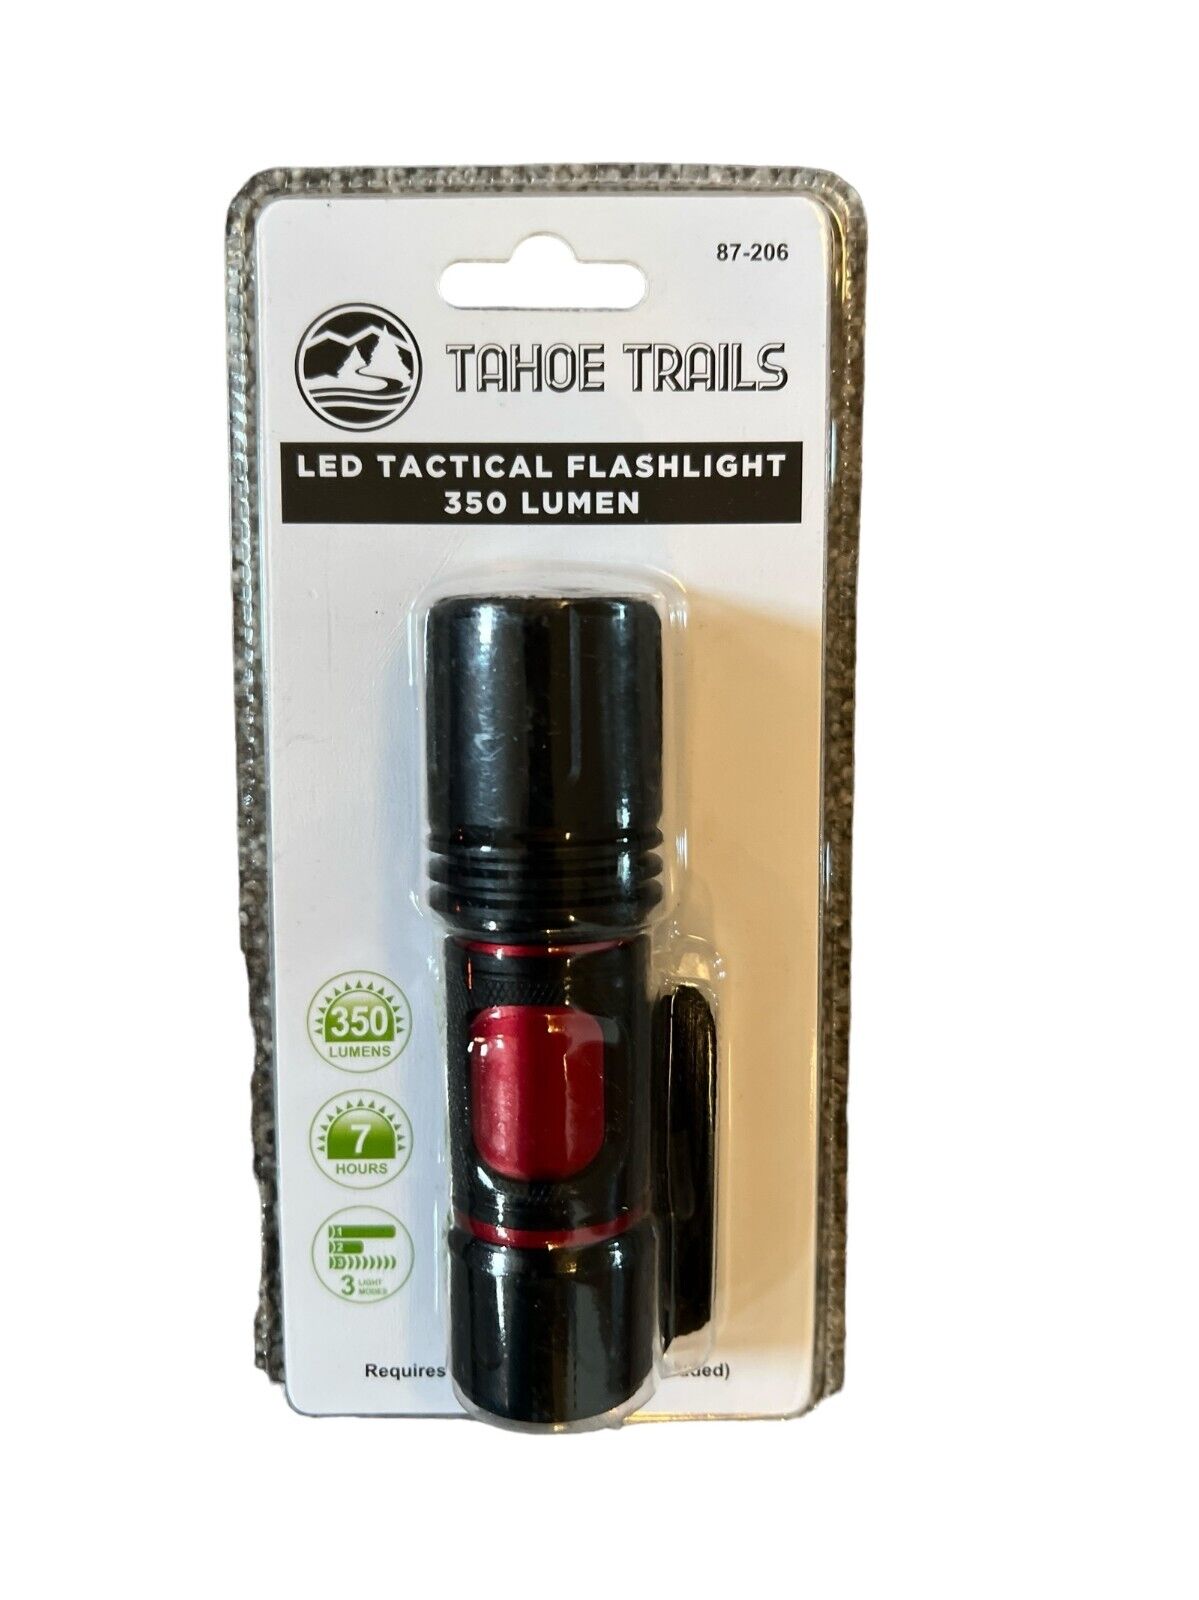 Tahoe Trails Cree LED Tactical Flashlight 350 Lumen 3 Modes High, Low, Strobe